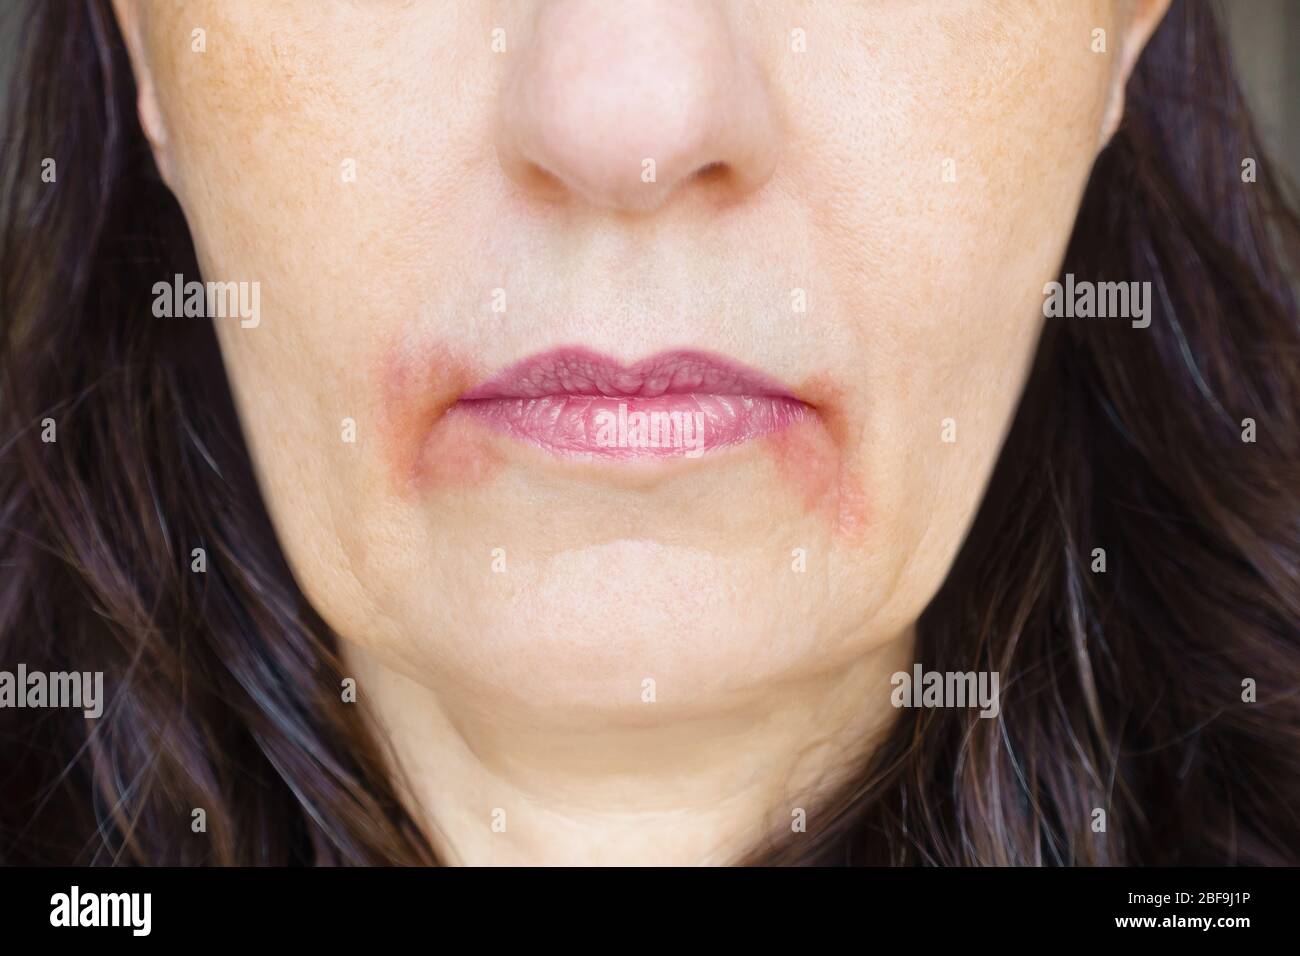 Perleche or perioral dermatitis: womans mouth with big red spots of  inflamed skin around the corners Stock Photo - Alamy